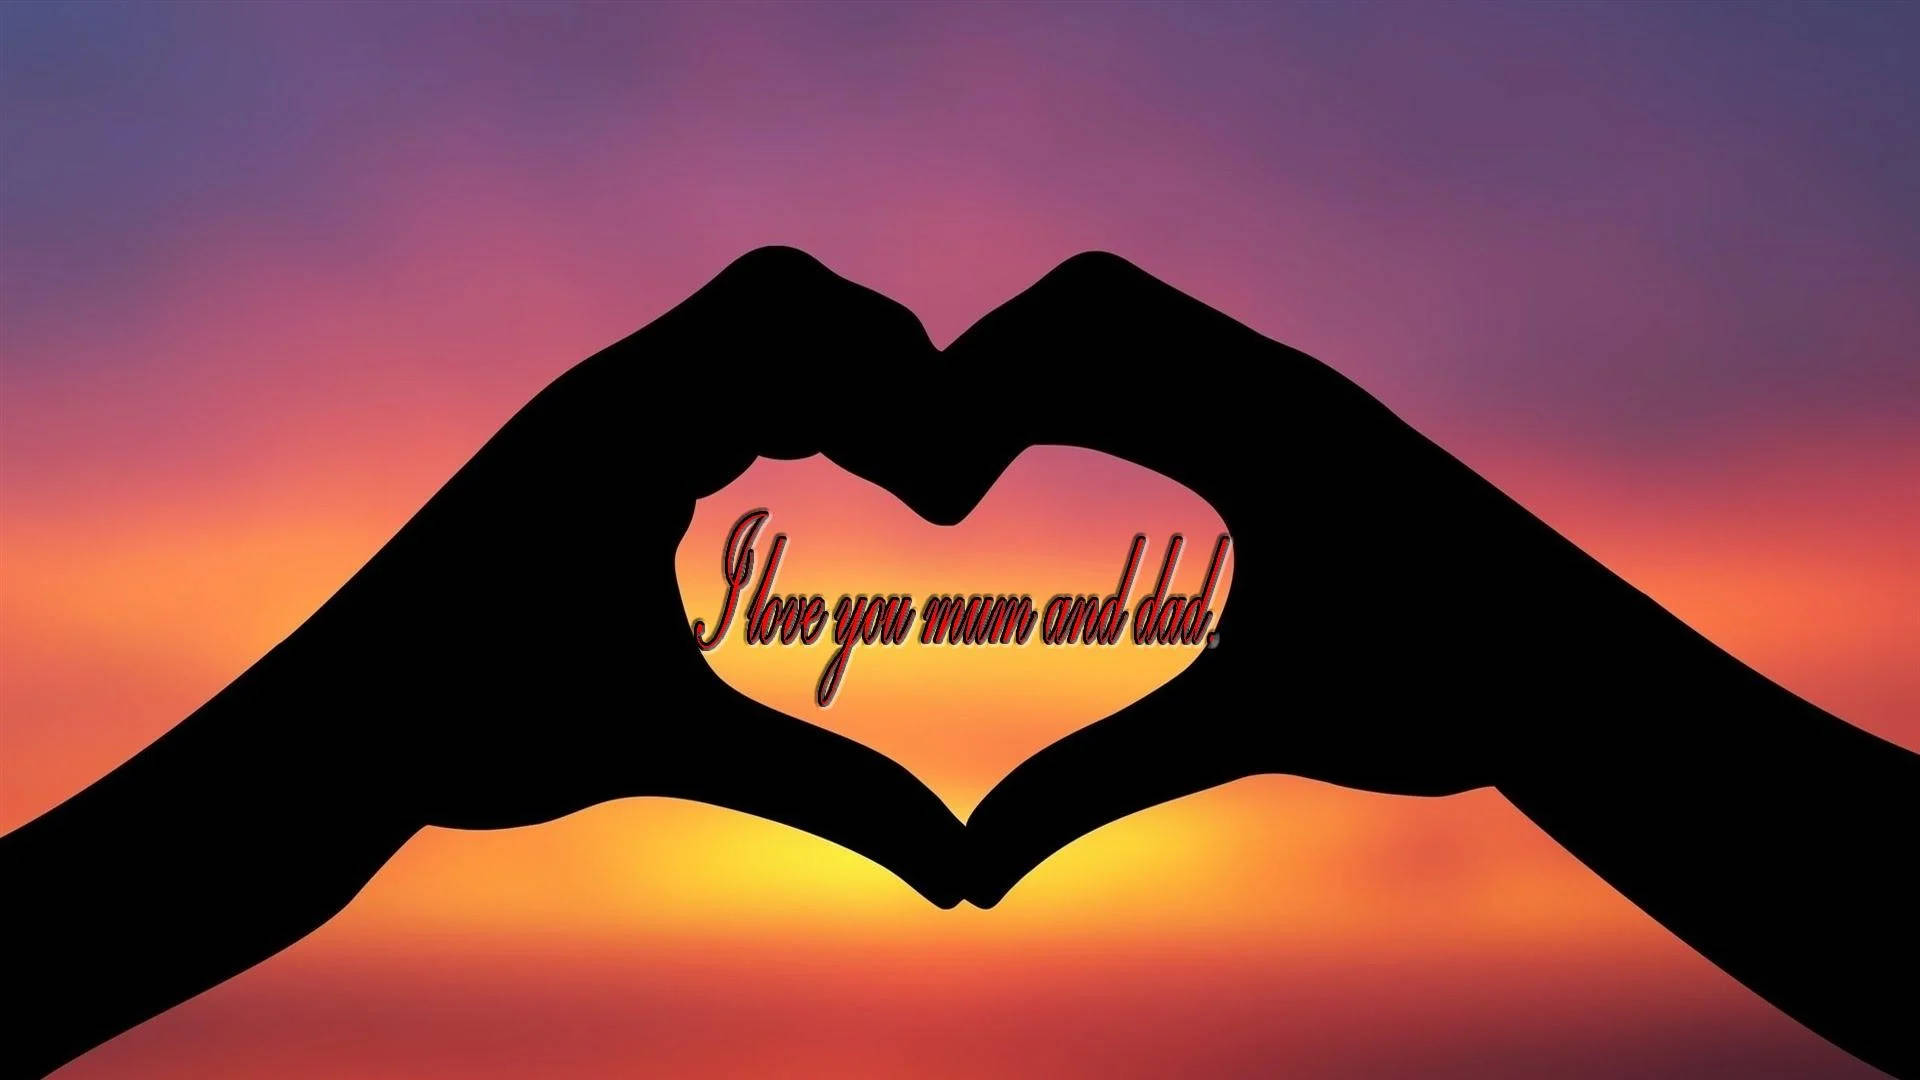 Mom And Dad Heart Hands Background